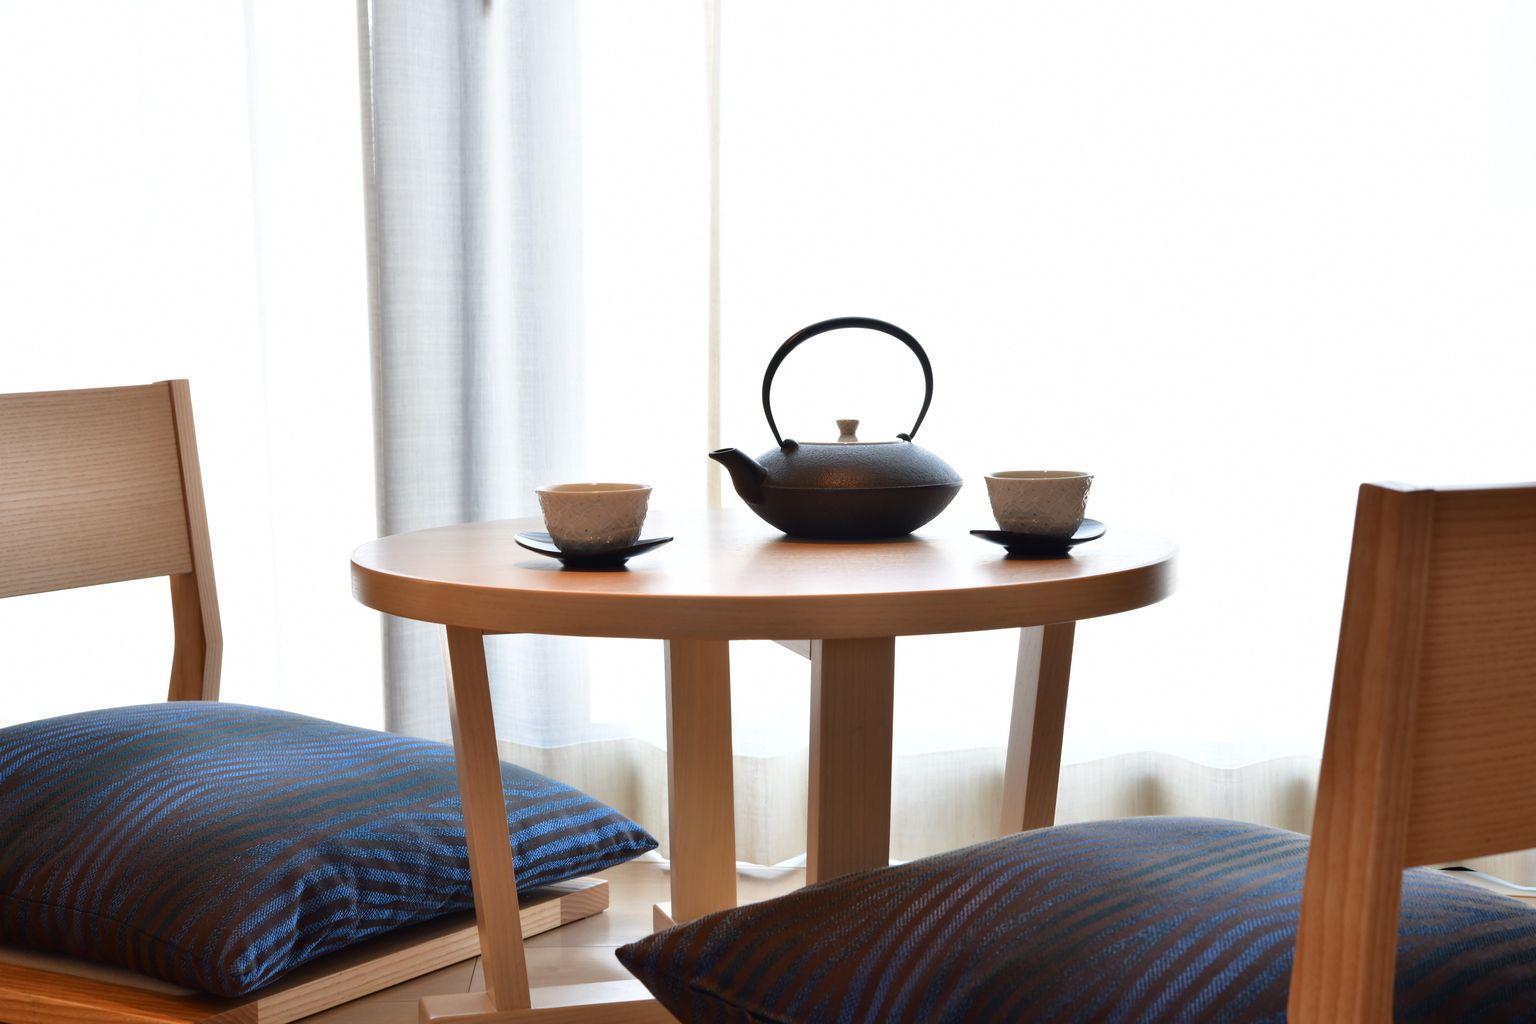 Two Kyoto Accommodations That Put Culture and Comfort First